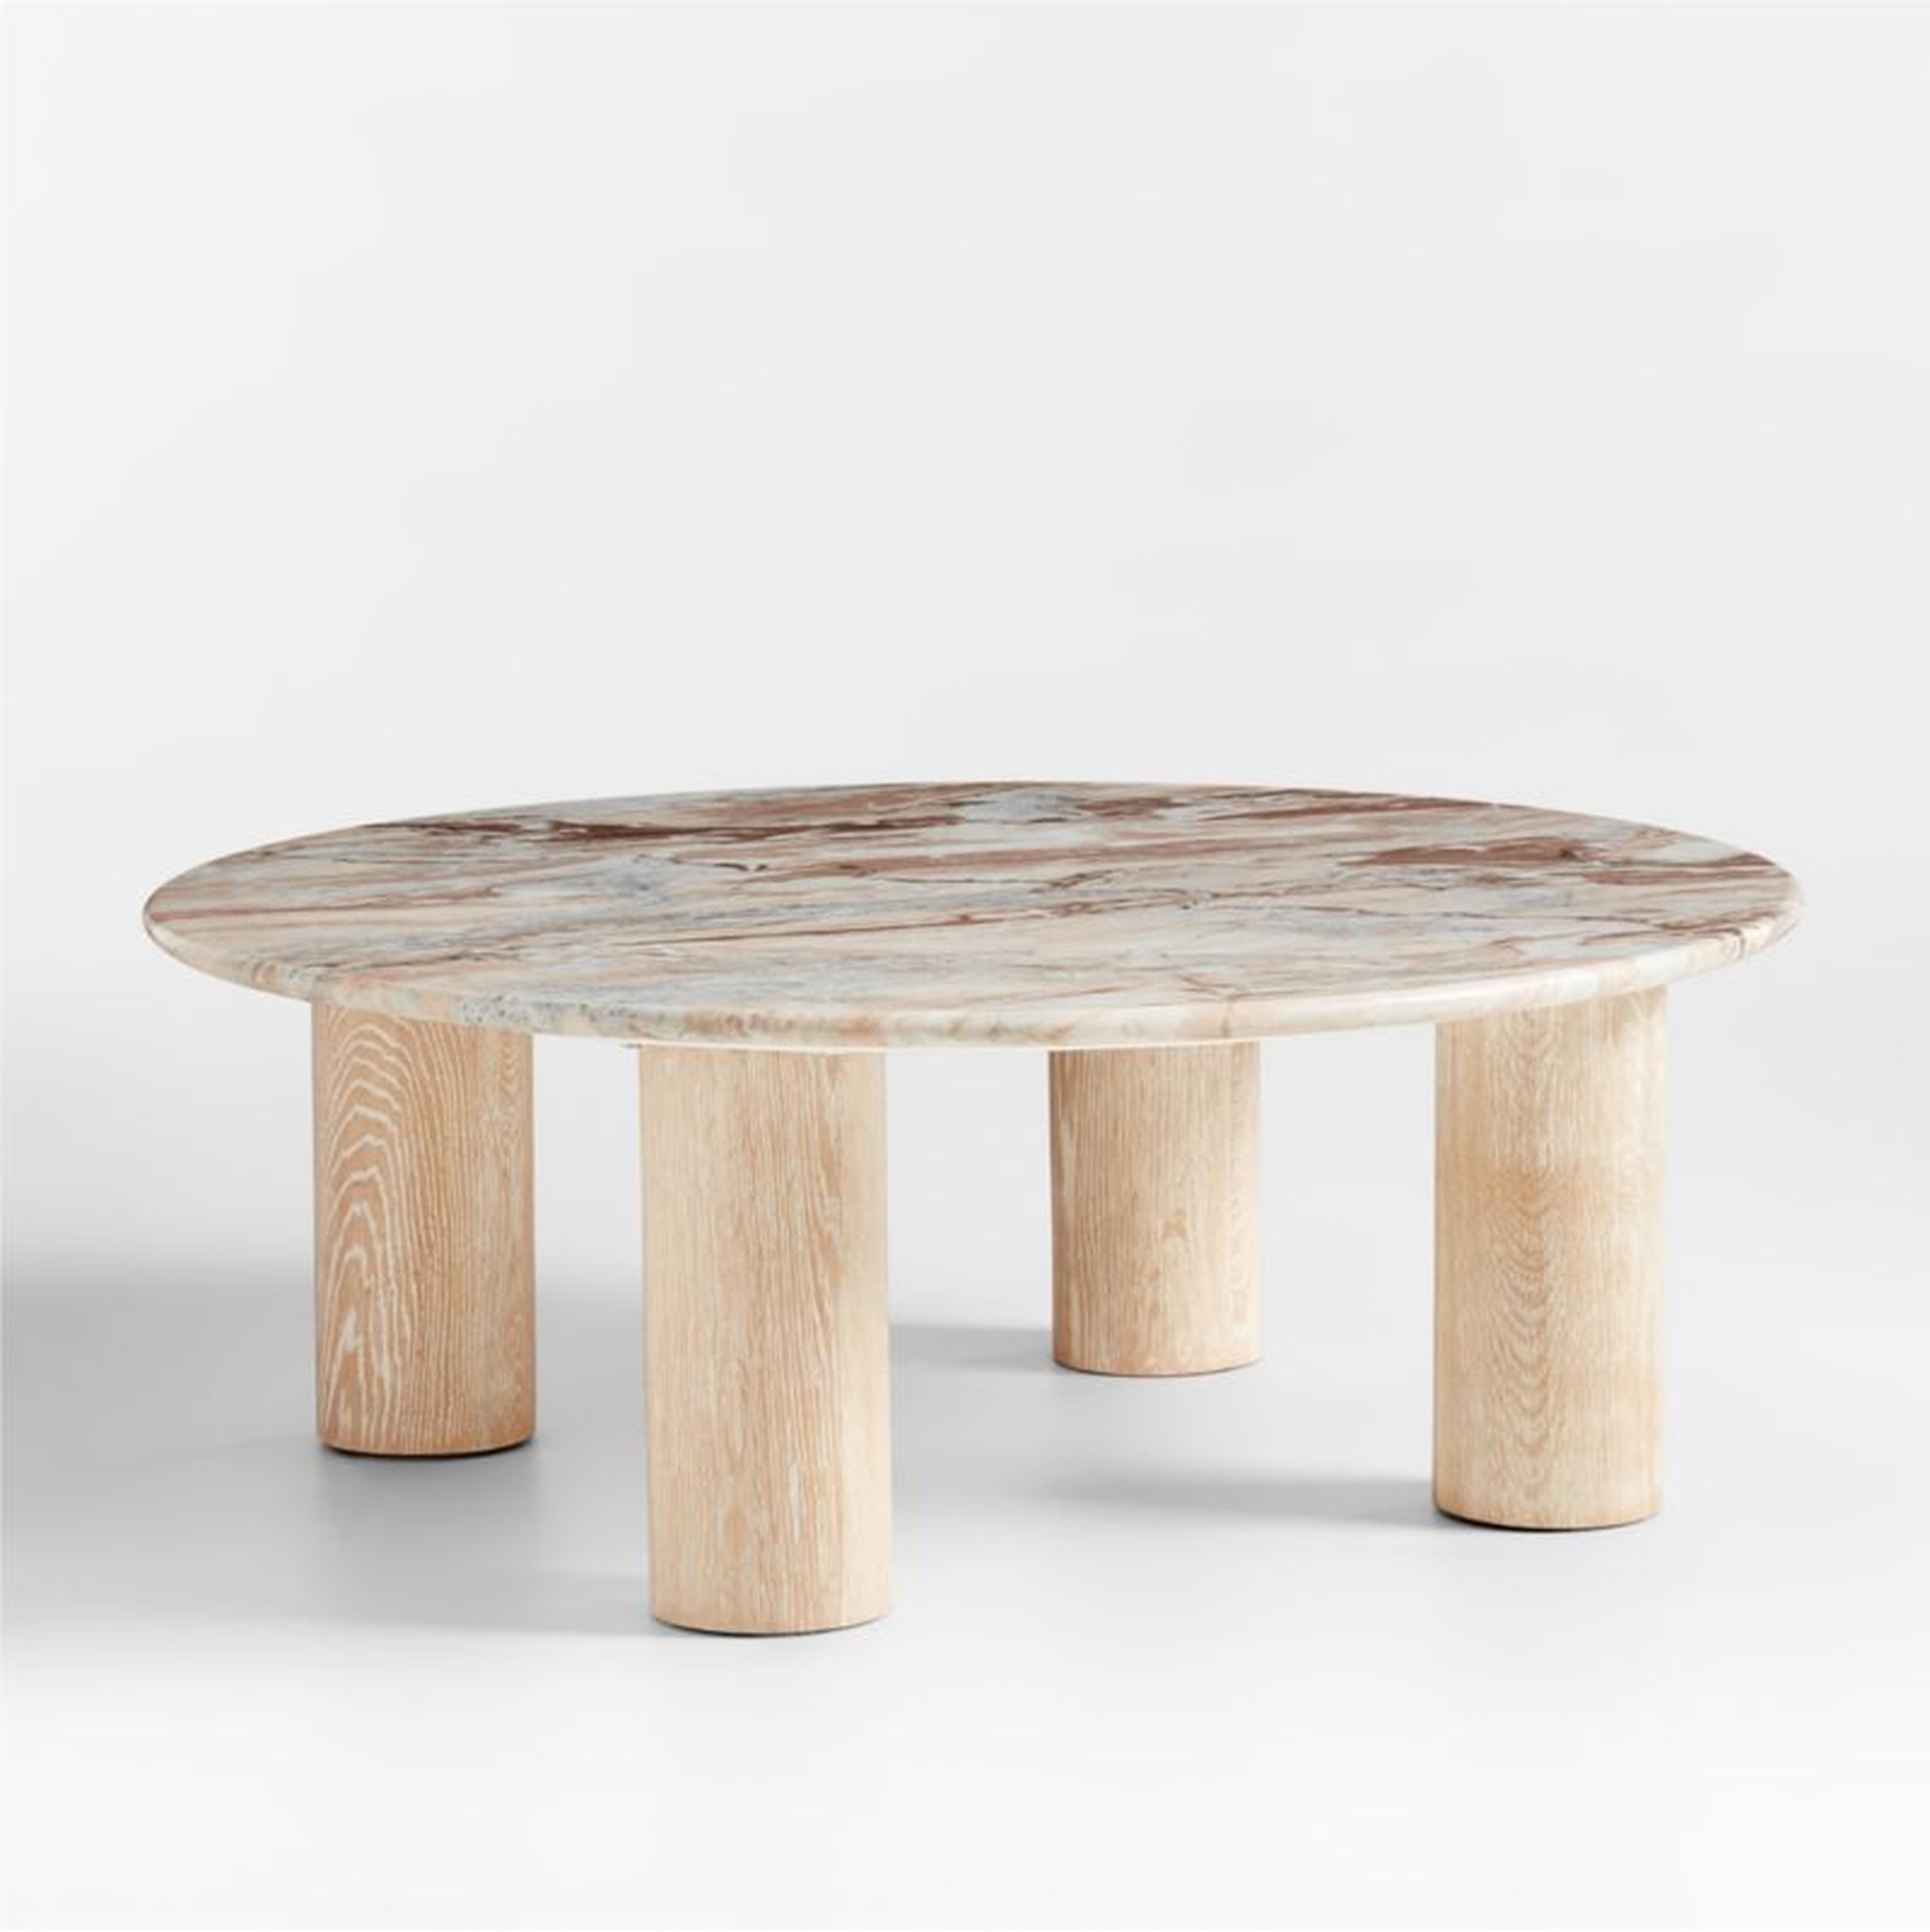 Homage Round White Oak Wood and Marble Coffee Table - Crate and Barrel